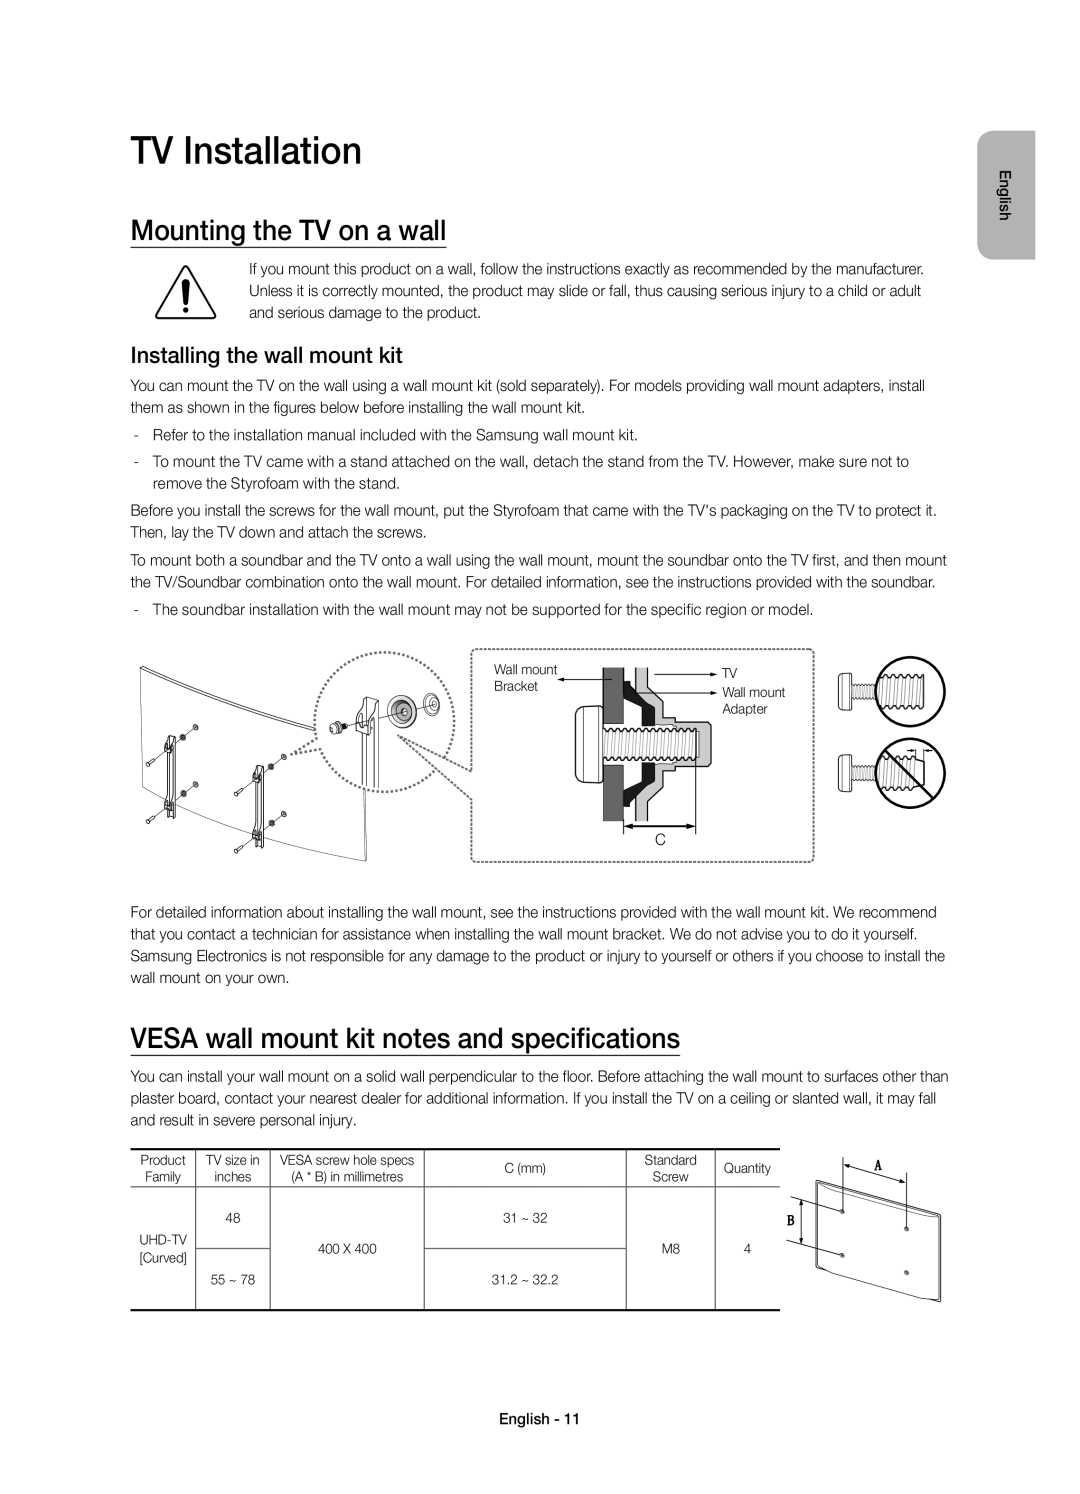 Samsung UE65JU7500TXXU manual TV Installation, Mounting the TV on a wall, VESA wall mount kit notes and specifications 